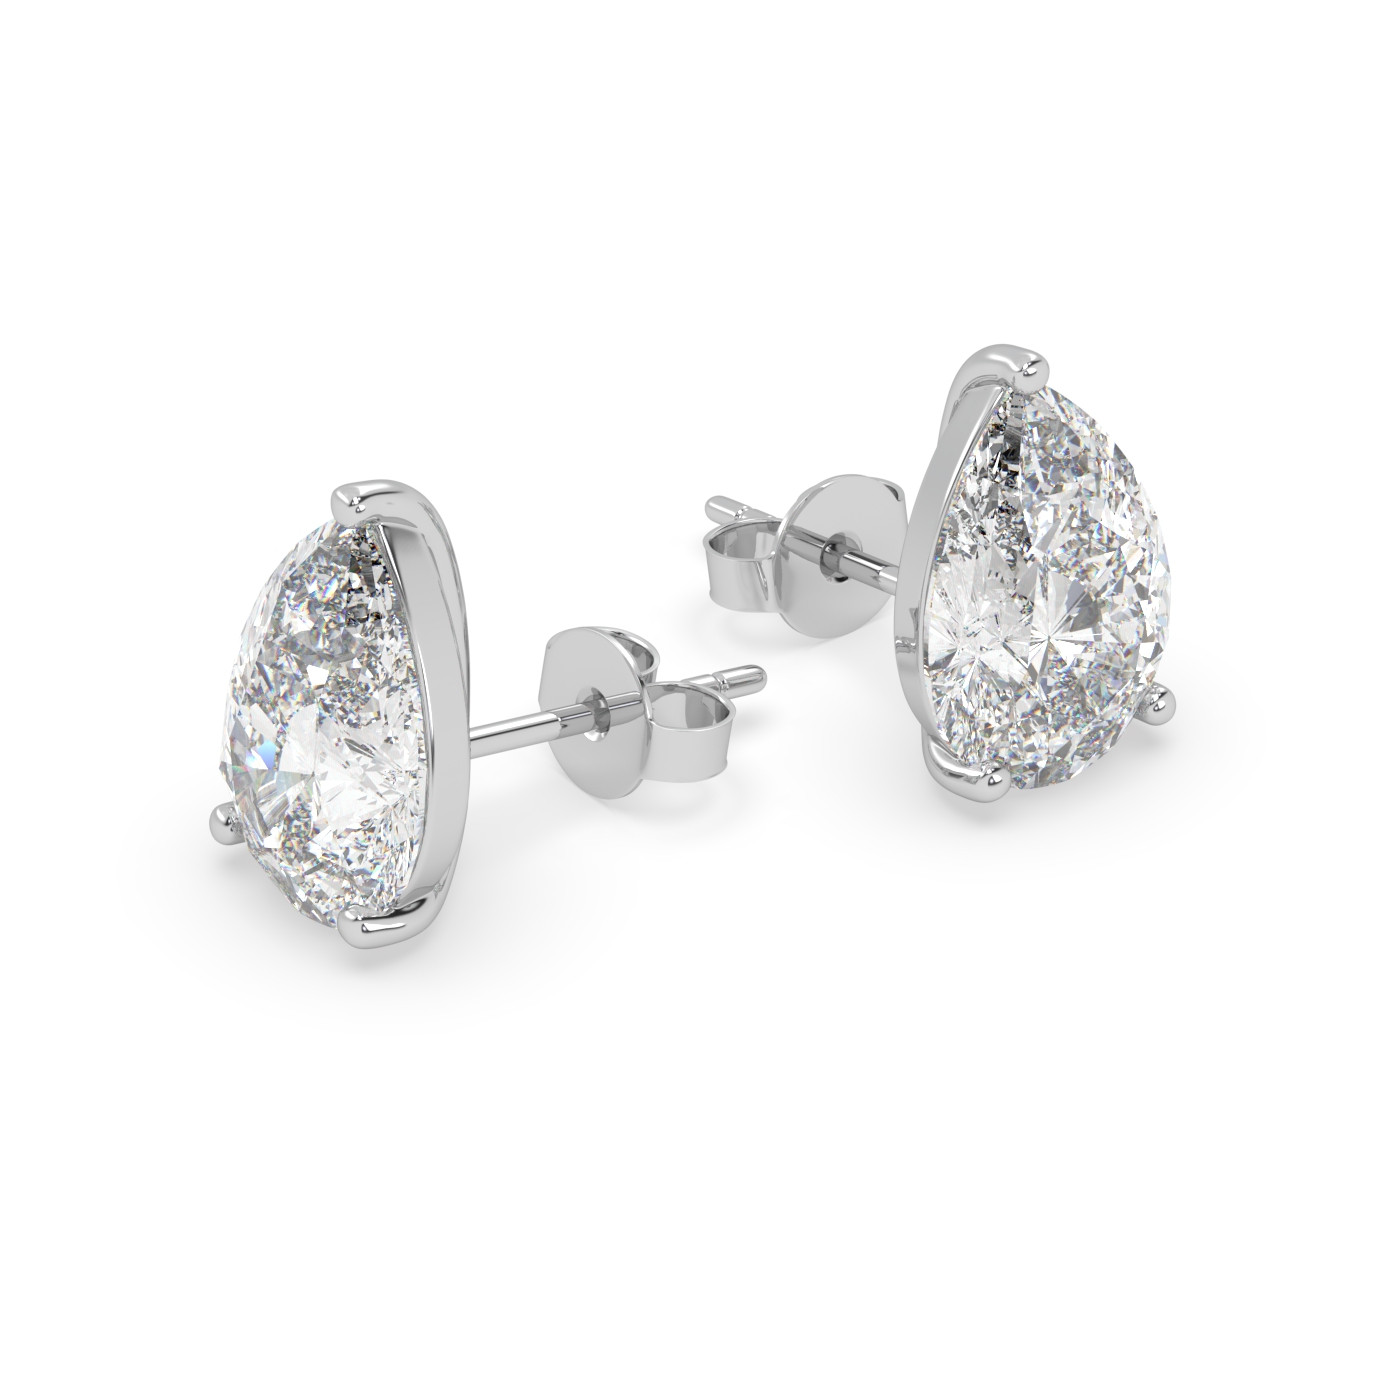 18K WHITE GOLD Pear Stud Earrings with butterfly back